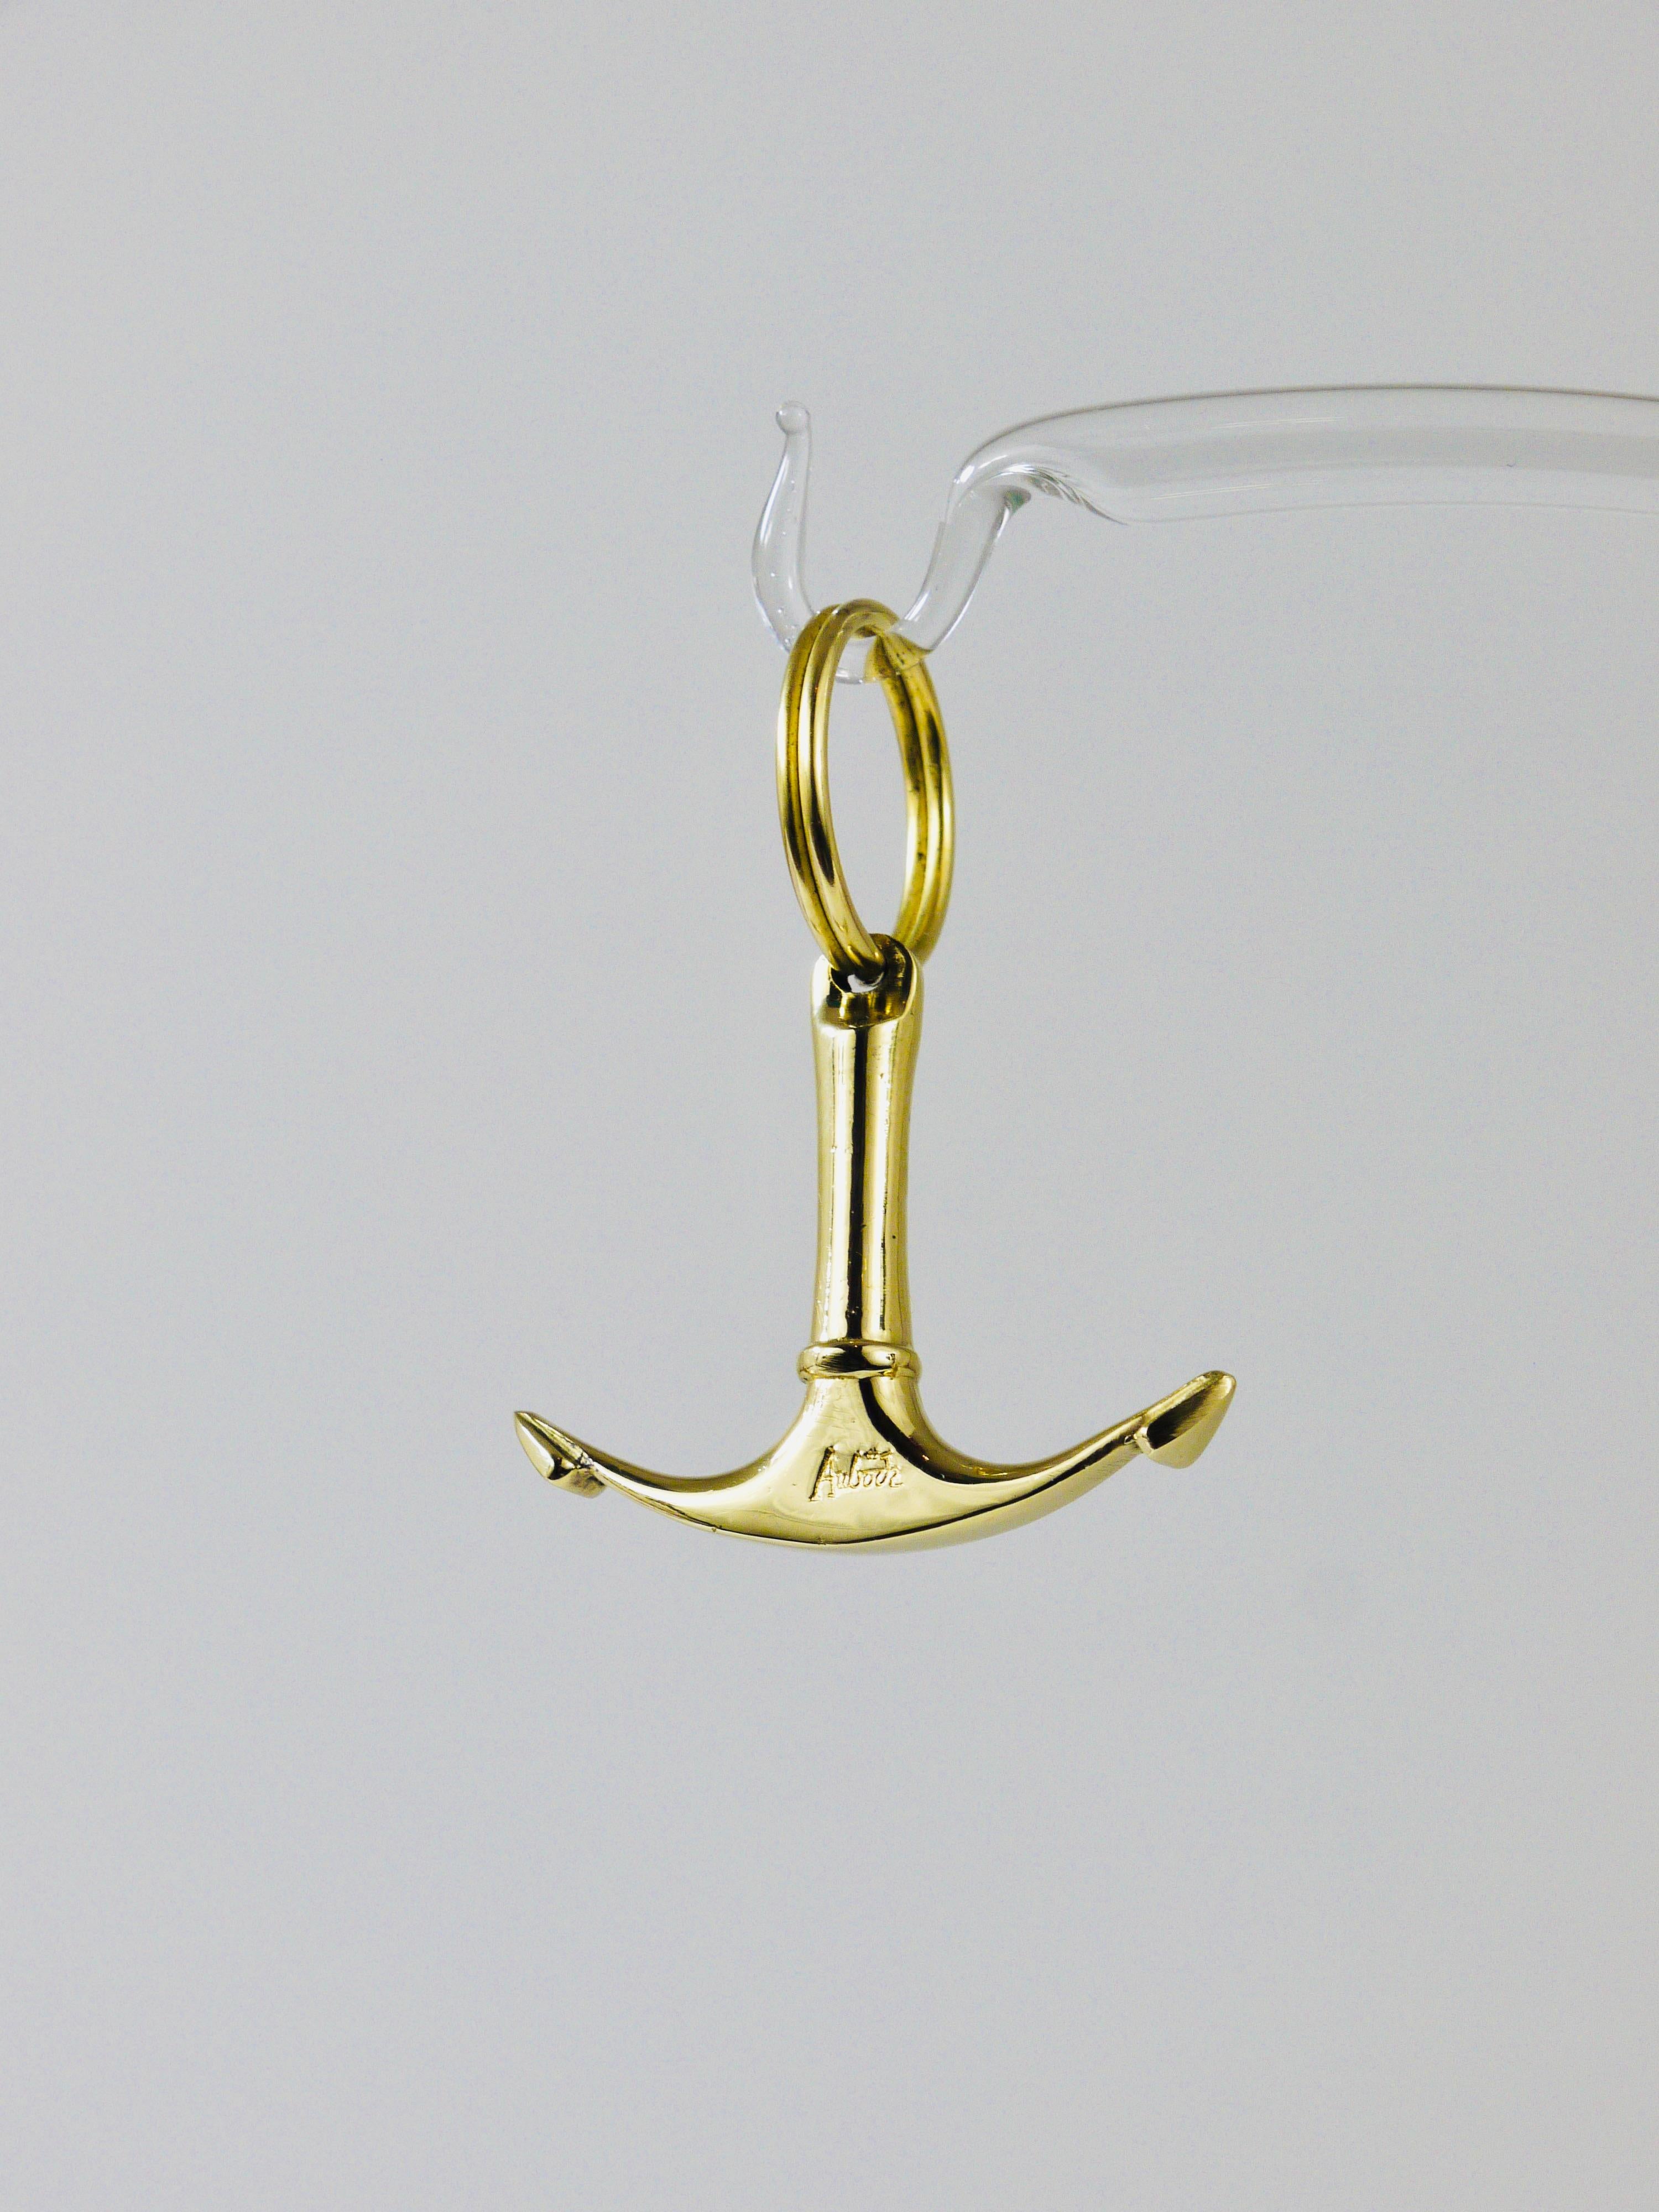 Austrian Carl Auböck Handcrafted Midcentury Brass Anchor Figurine Key Ring Chain Holder For Sale